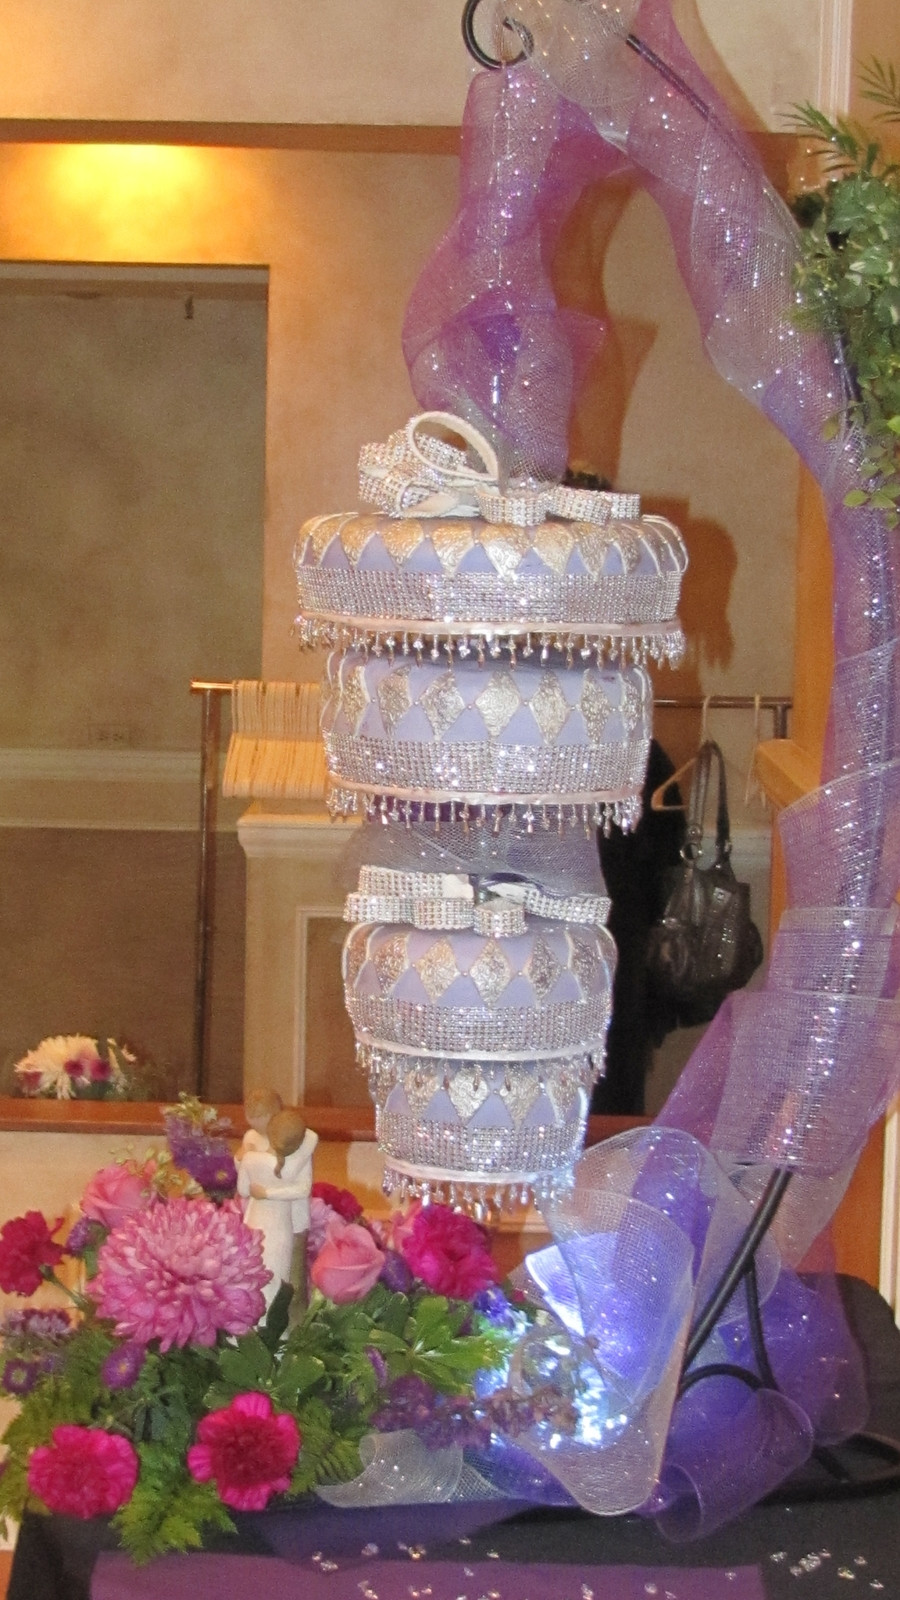 Chandelier Wedding Cakes
 Chandelier Wedding Cake CakeCentral